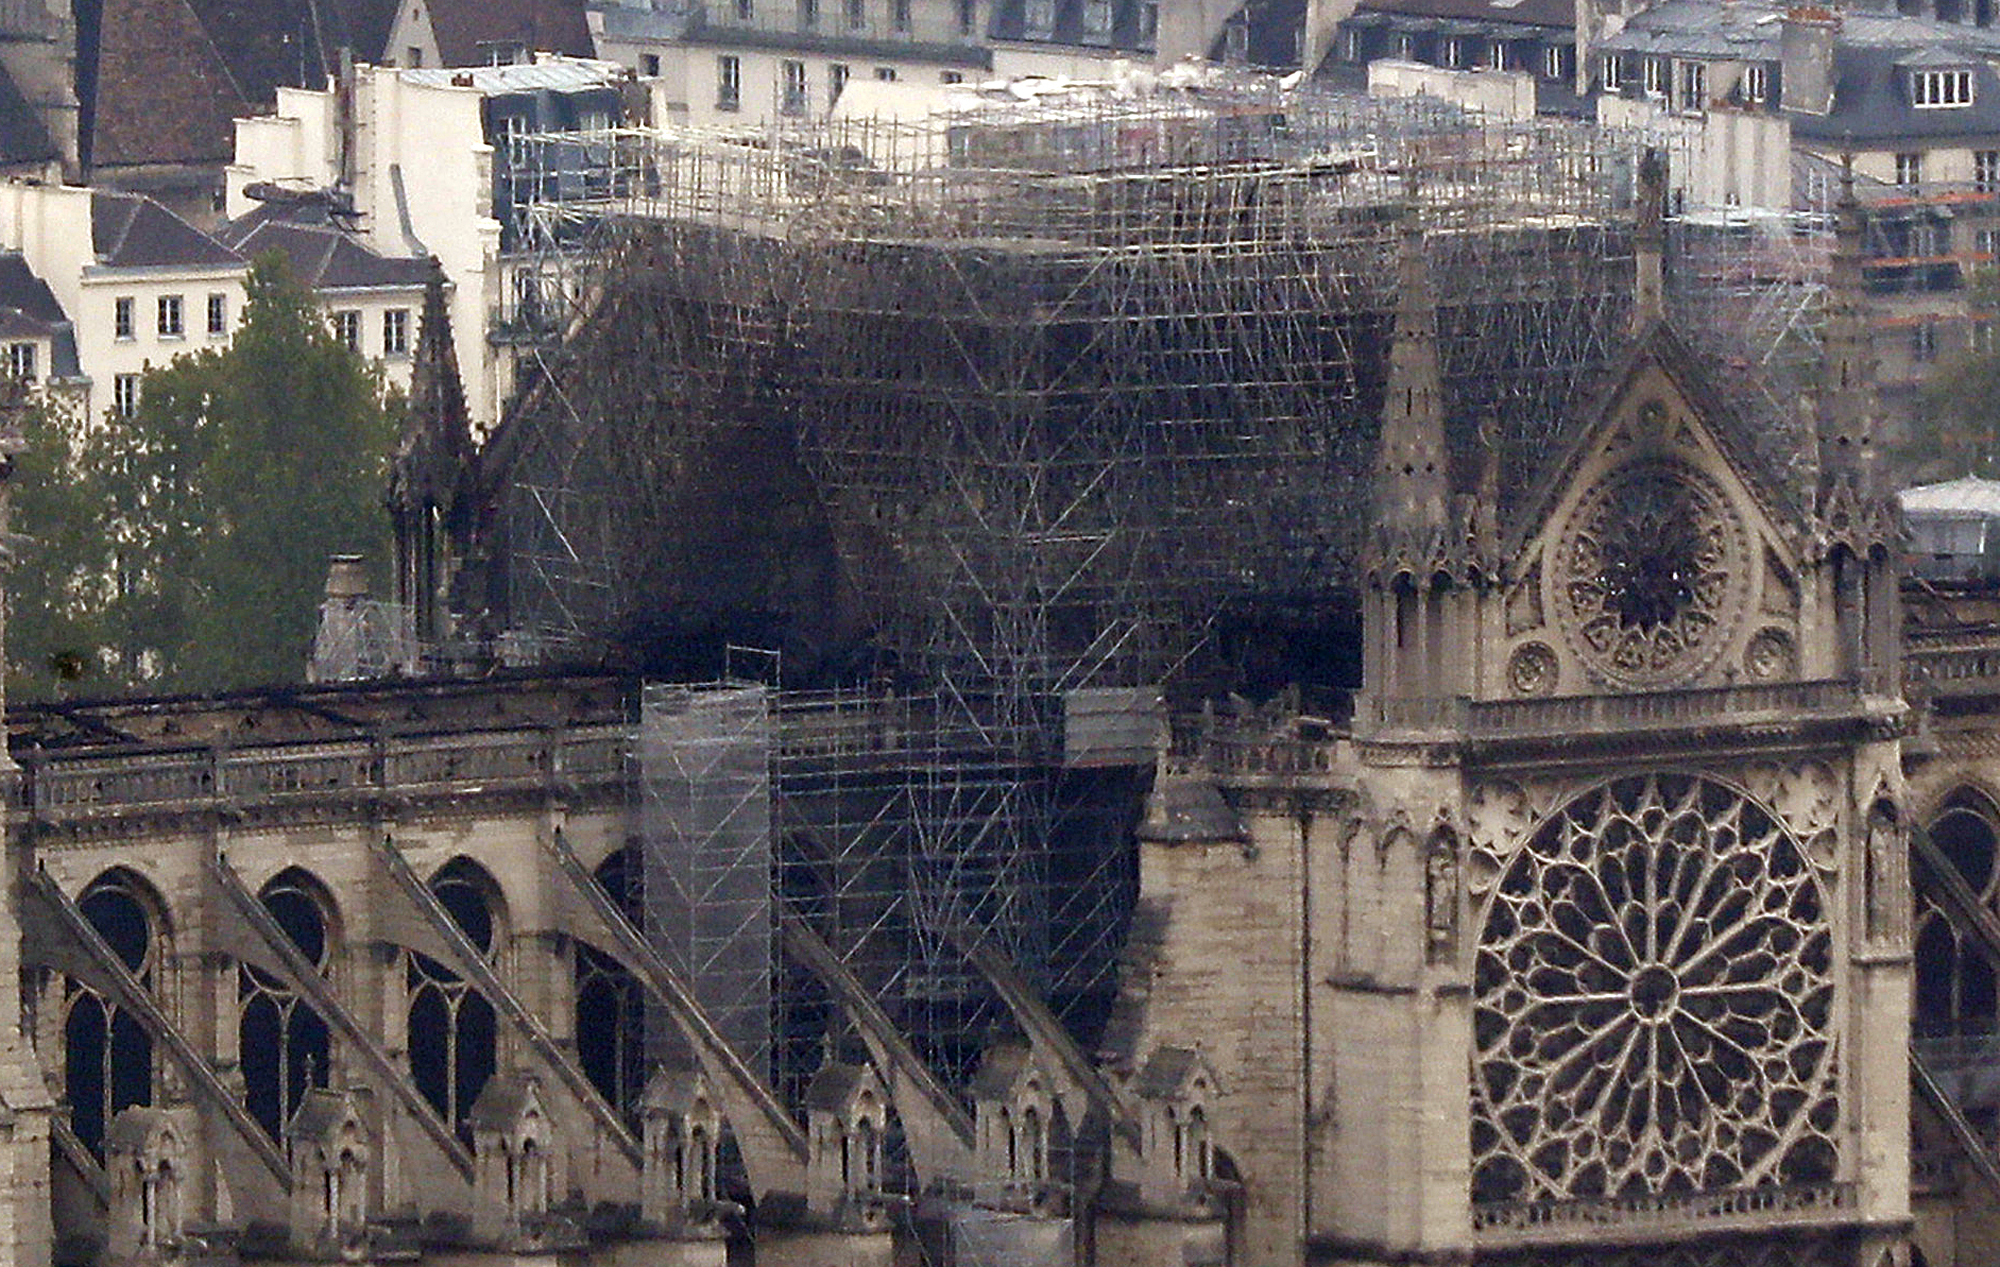 Here S What Notre Dame Looks Like After A 9 Hour Fire Vice